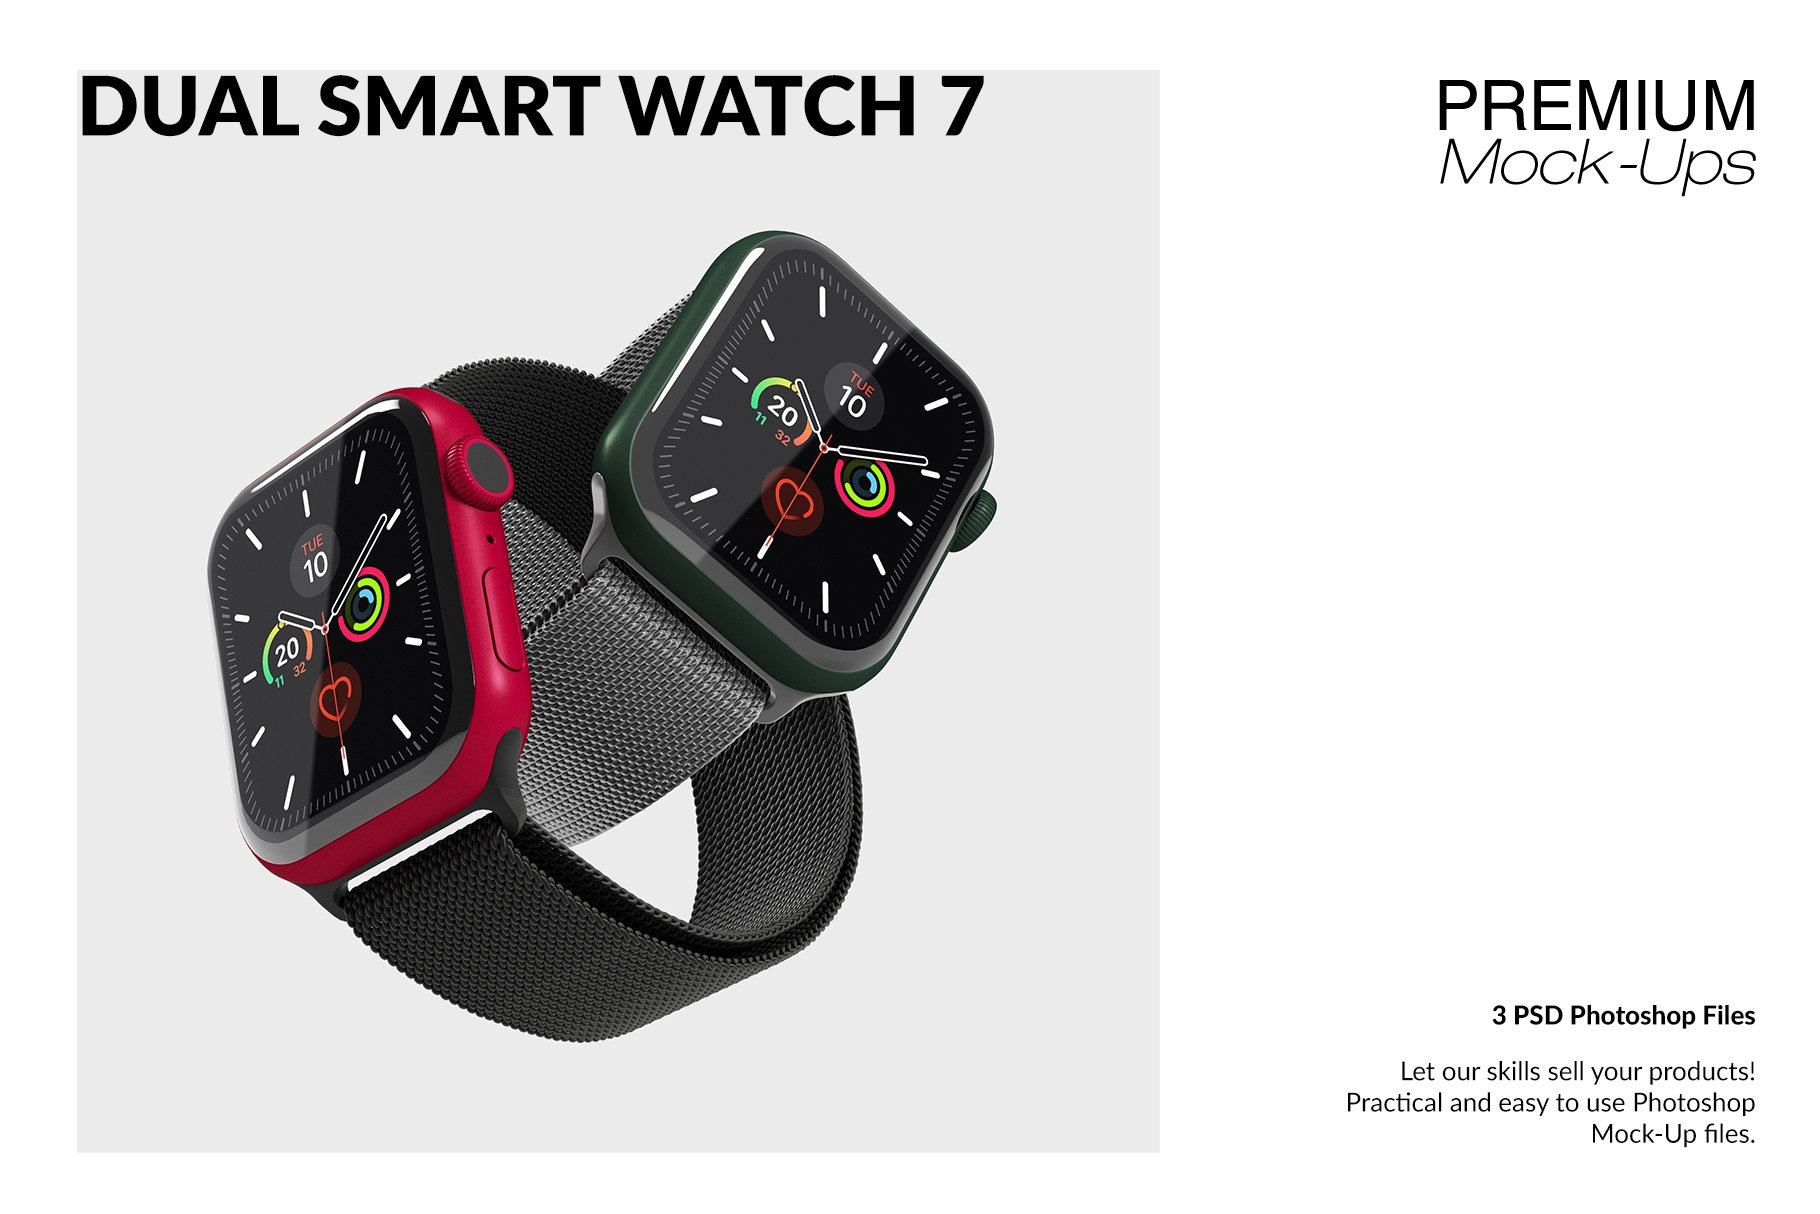 Dual Smart Watch 7 Mockups cover image.